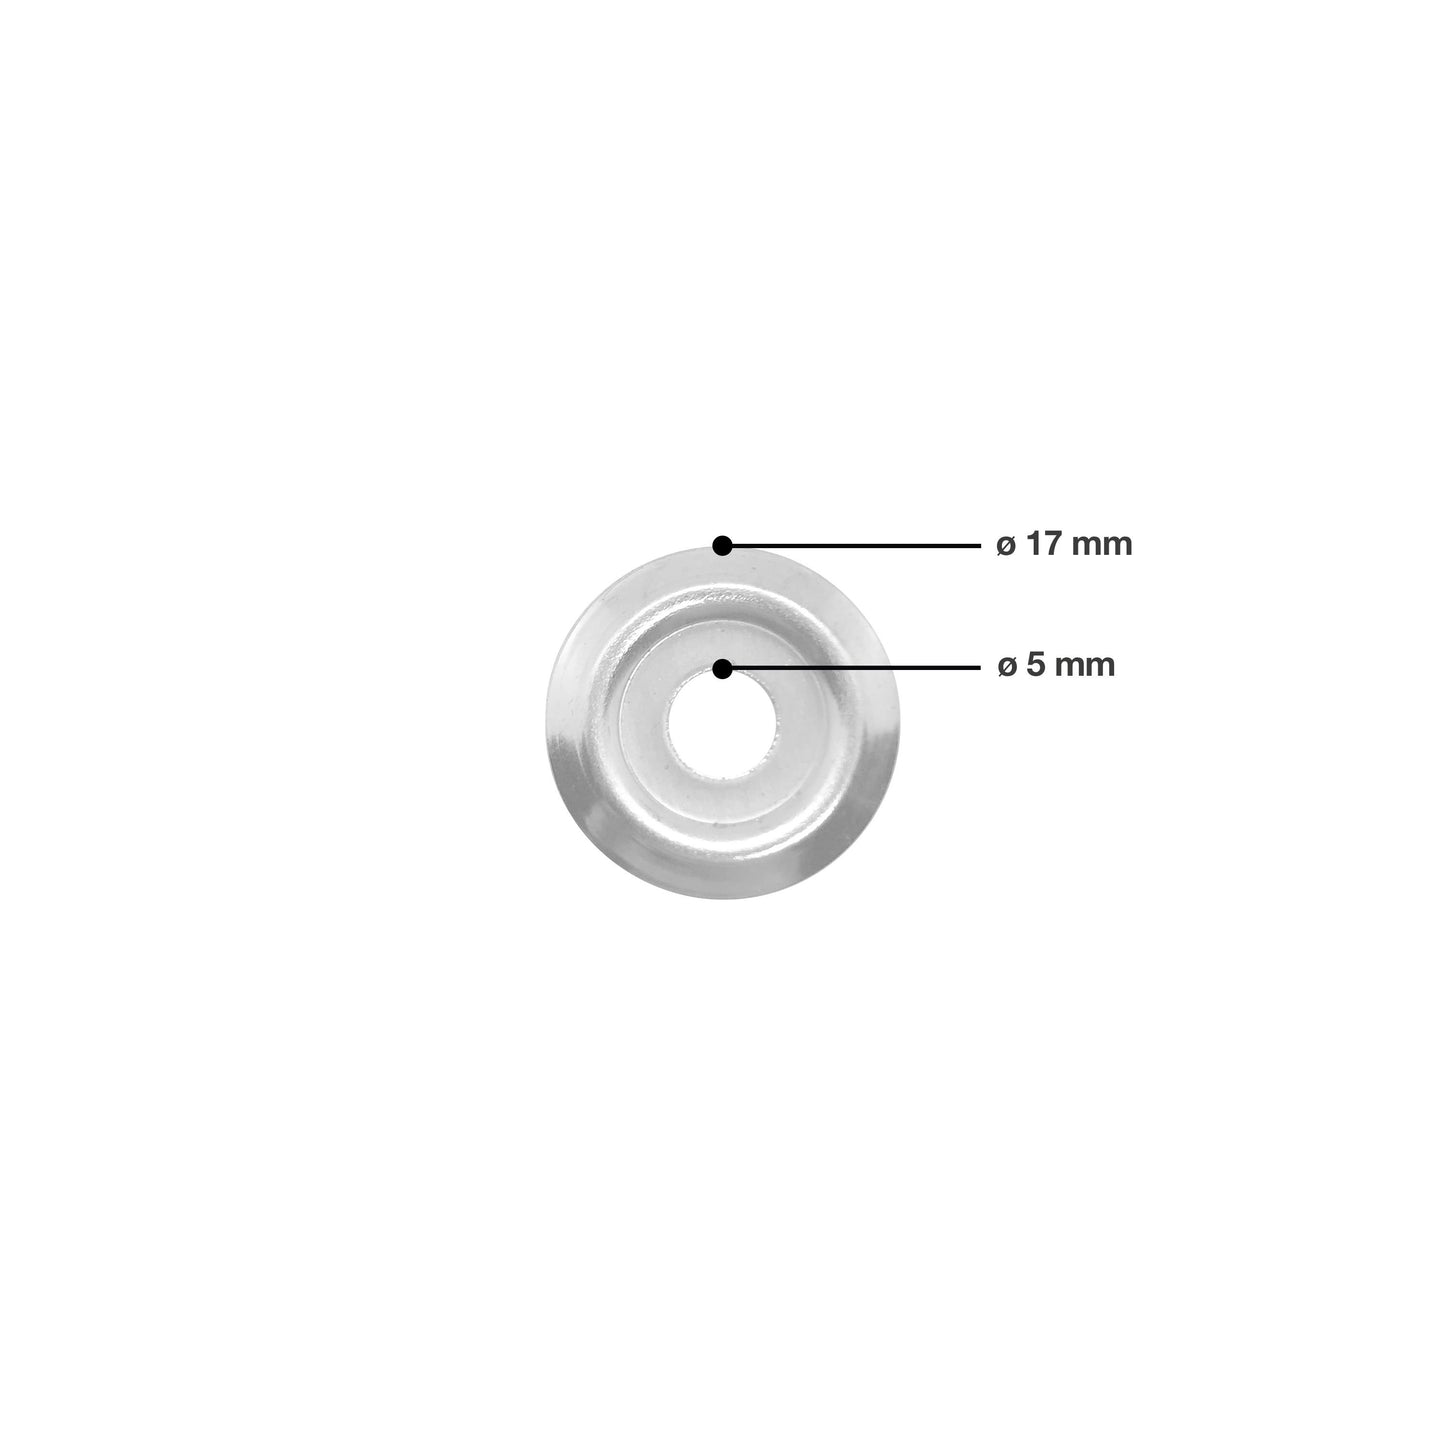 Size Illustration of Binding Screw Washer by Gobrecht & Ulrich